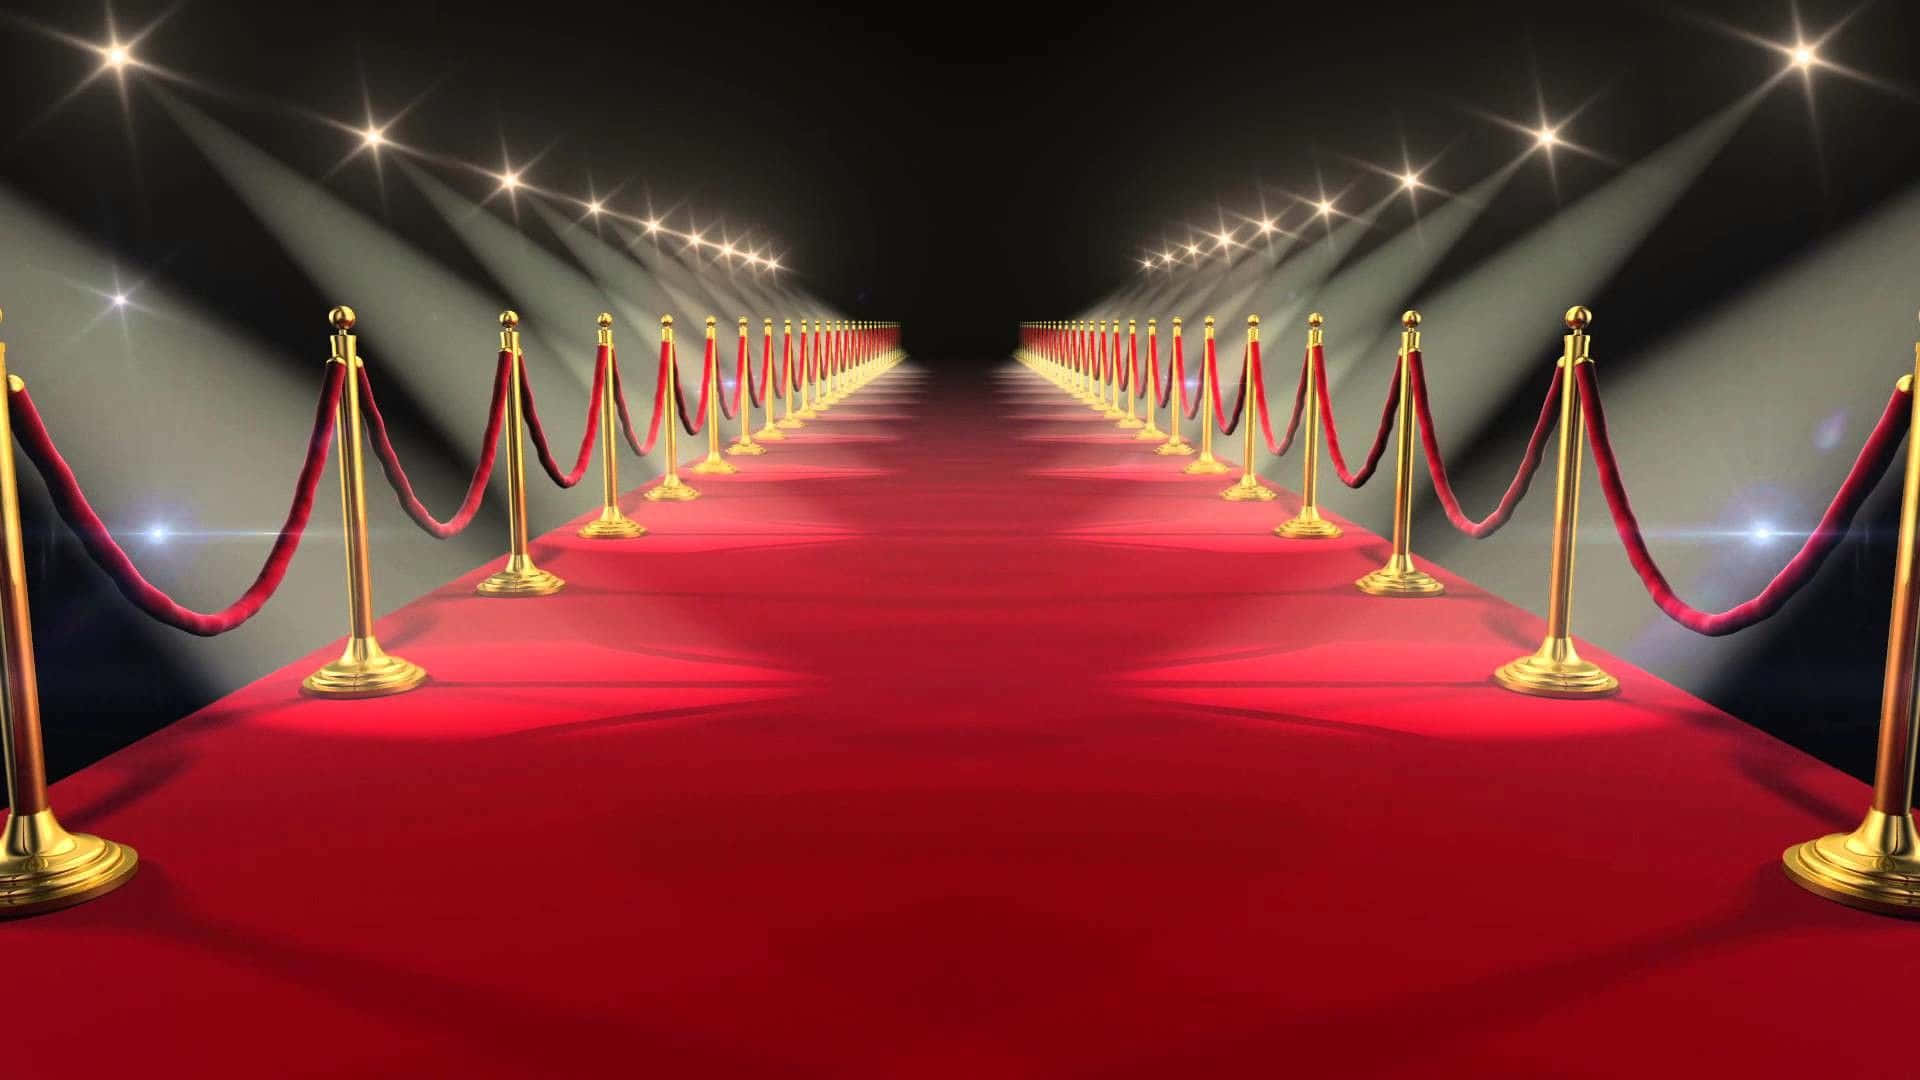 Red Carpet With Ropes And Spotlights Wallpaper